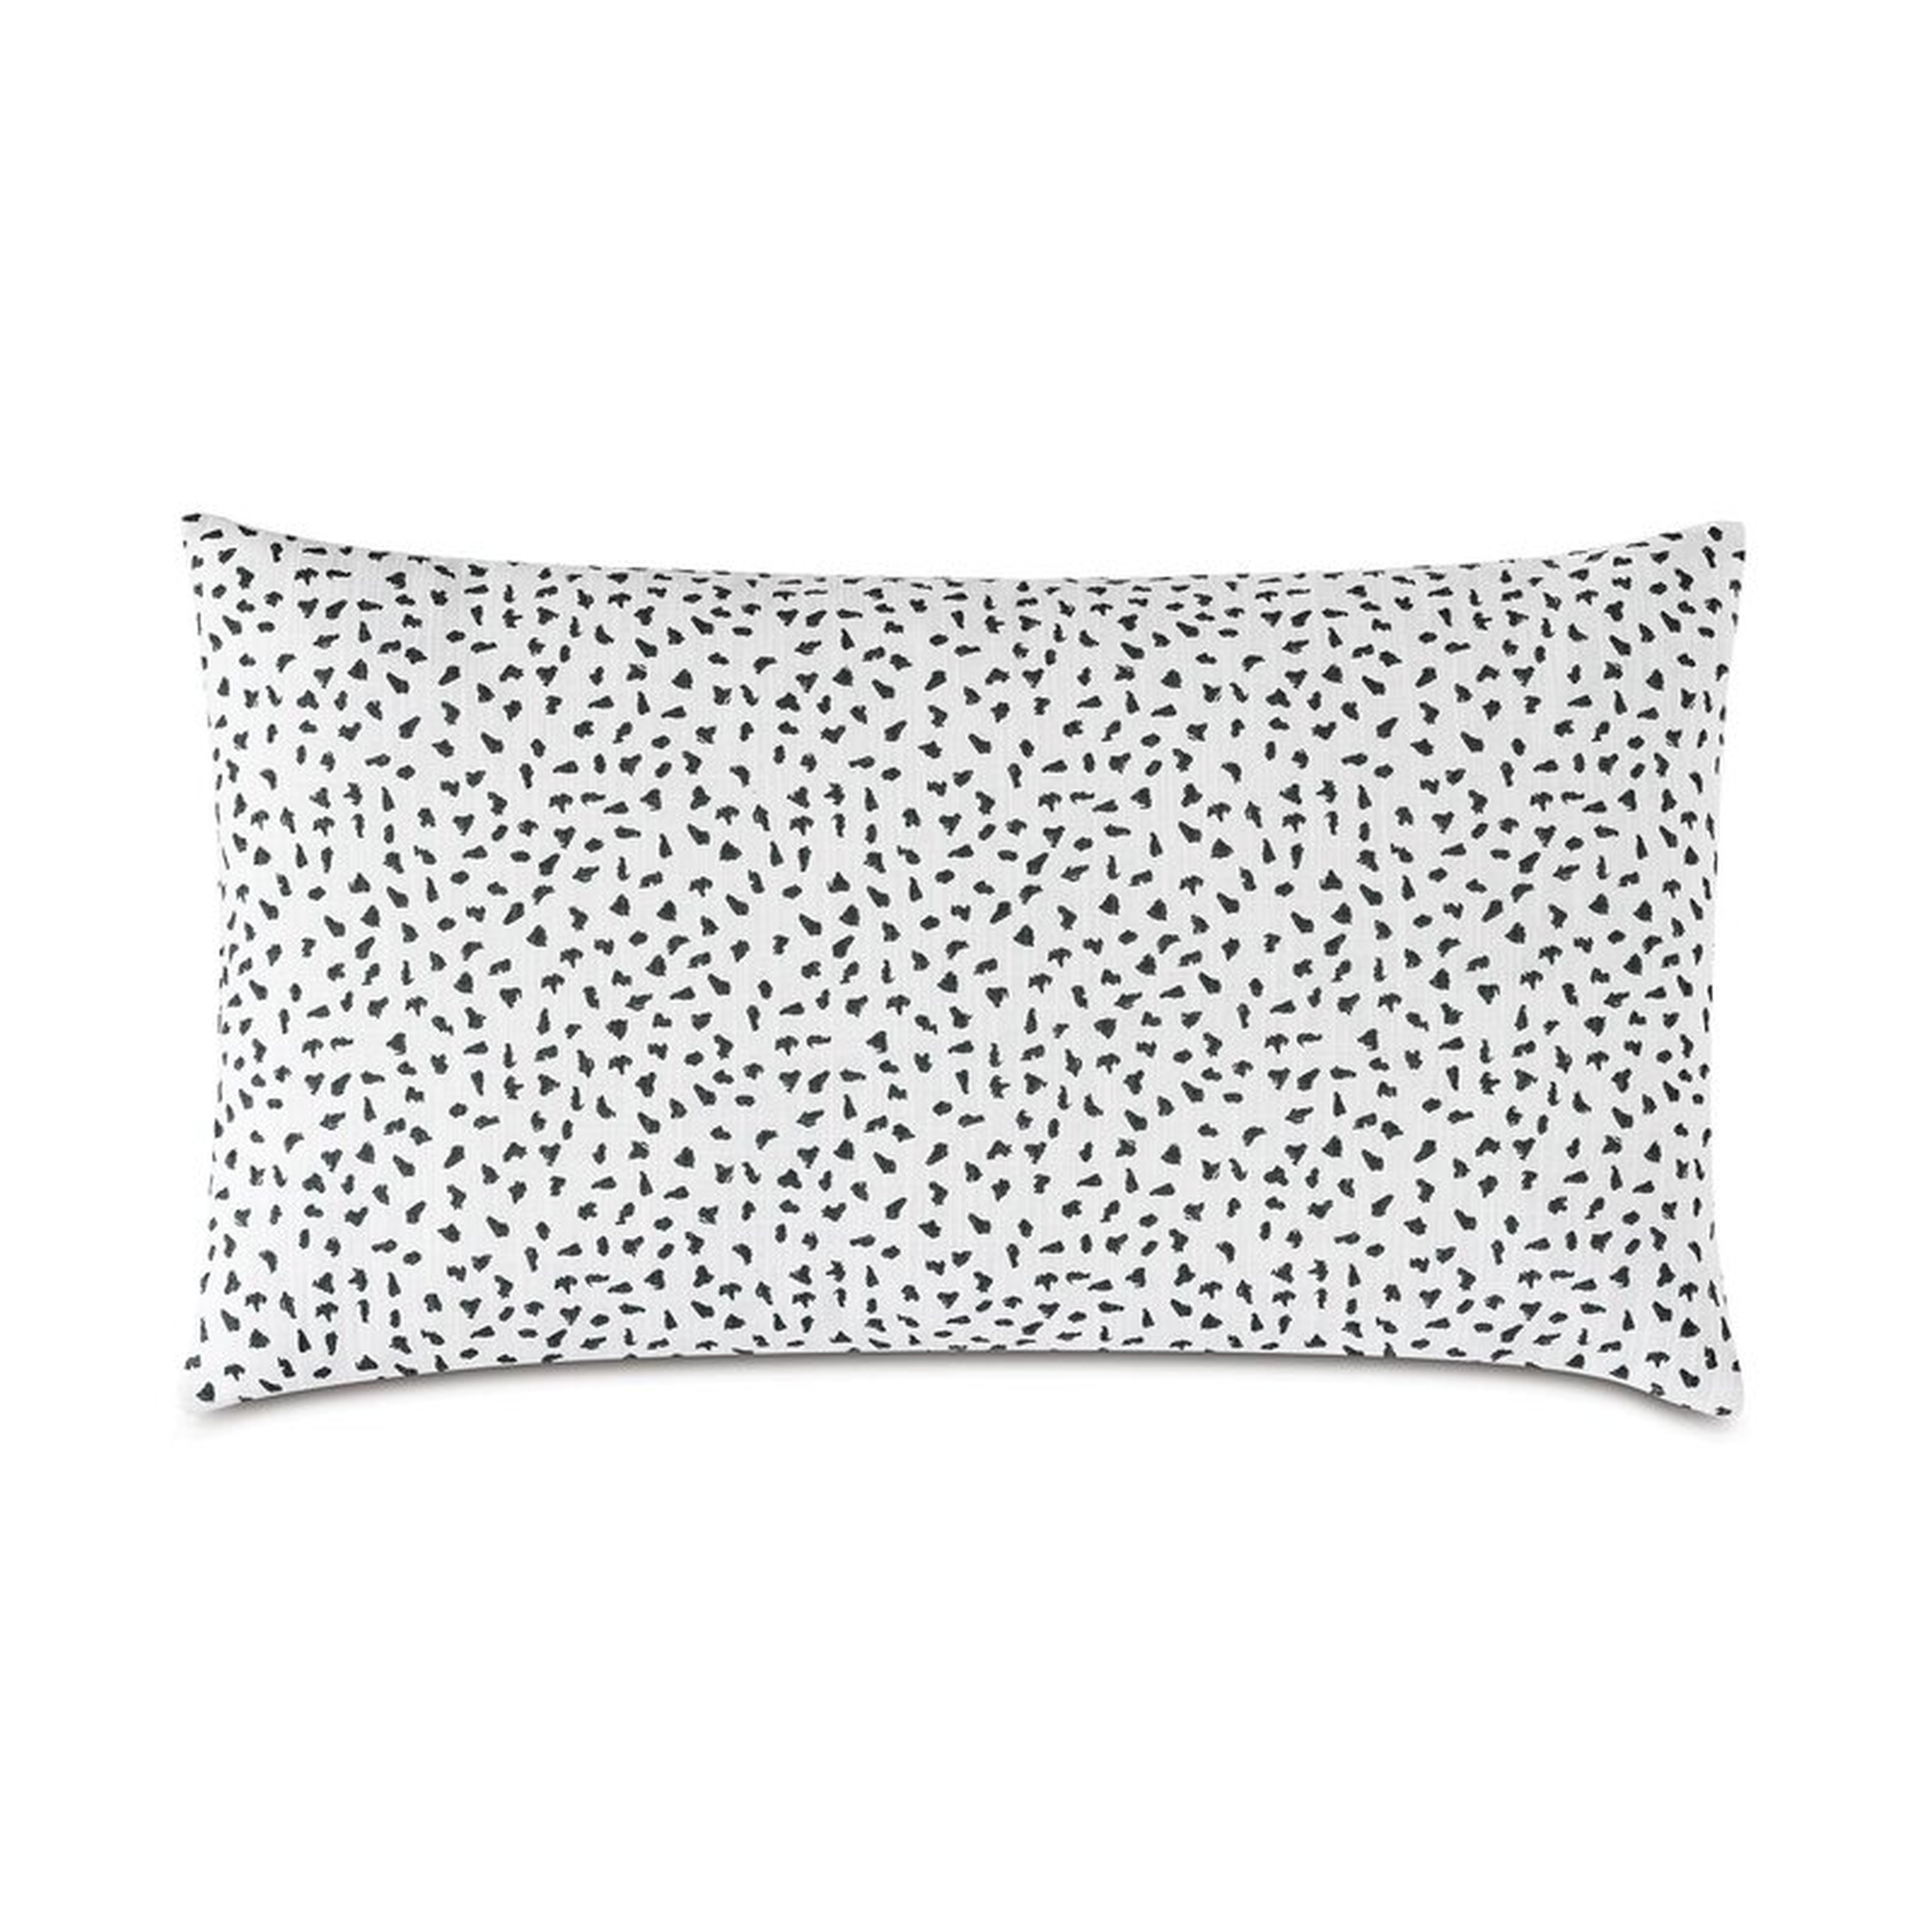 Eastern Accents Camden Speckled Rectangular Cotton Pillow Cover & Insert - Perigold